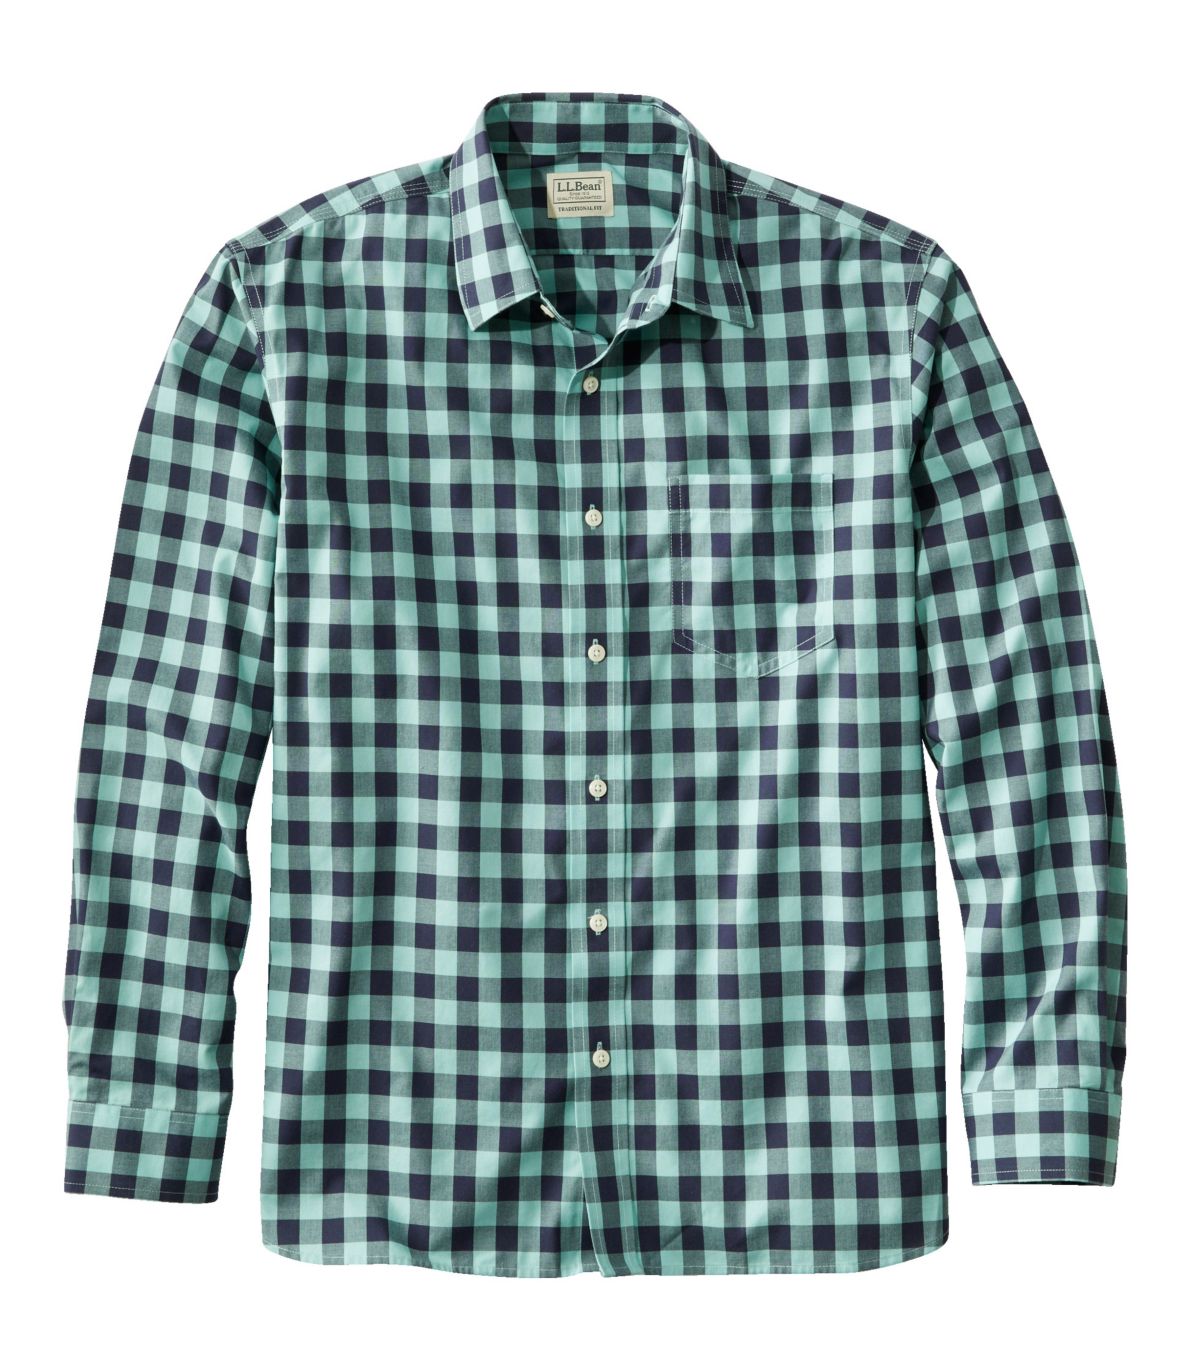 Men's Bean's Wrinkle-Free Everyday Shirt, Traditional Untucked Fit, Plaid, Long-Sleeve